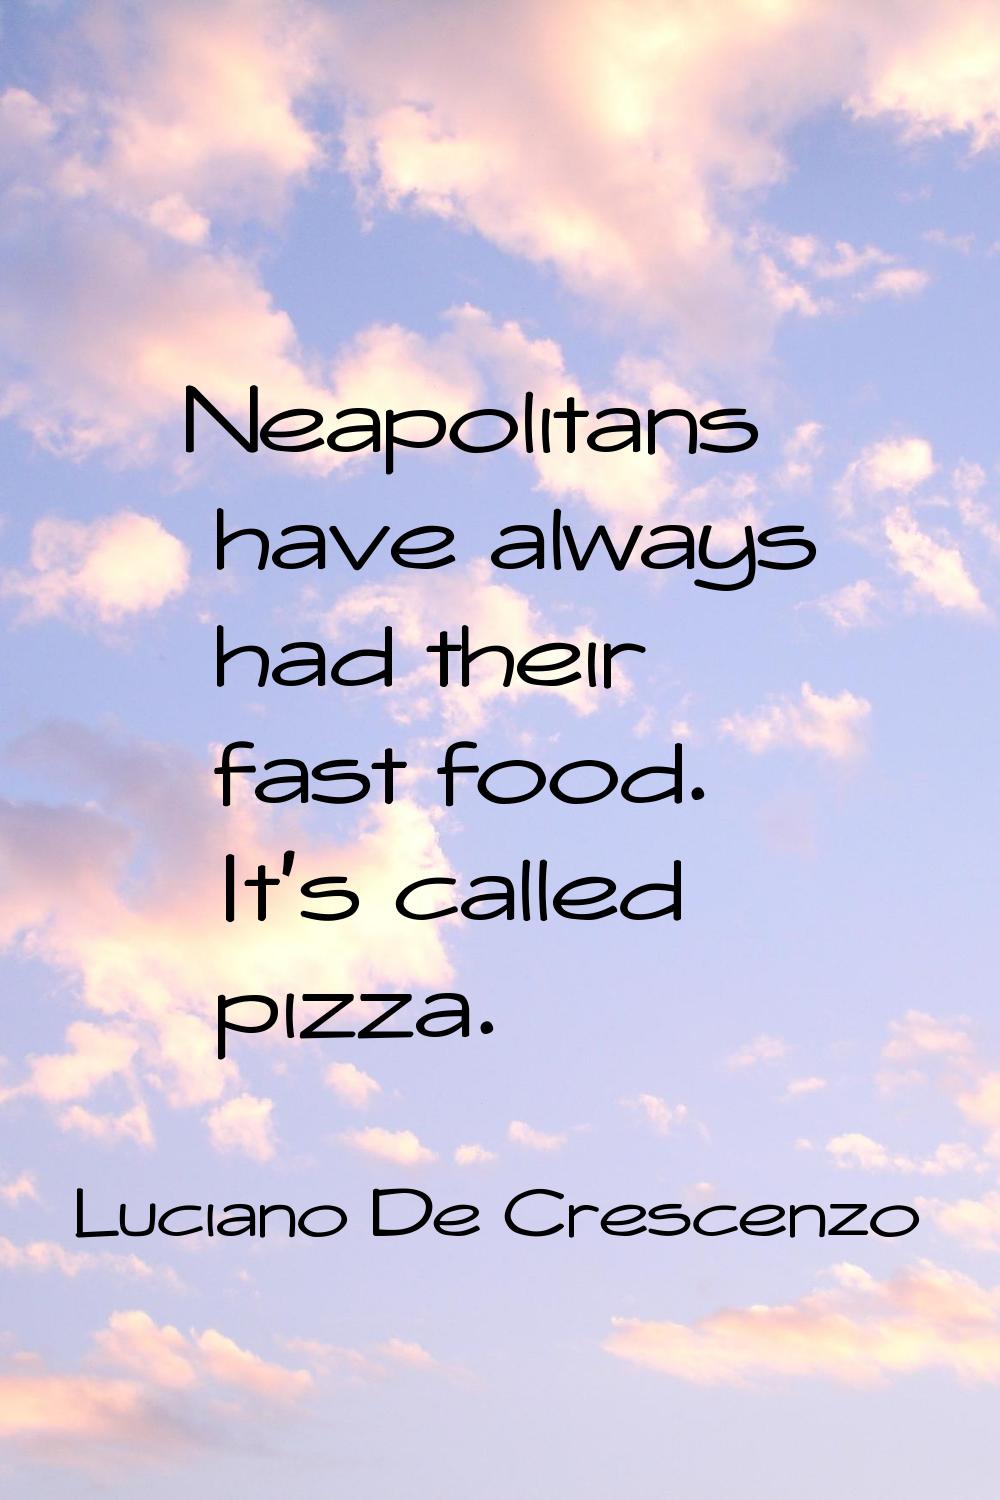 Neapolitans have always had their fast food. It's called pizza.